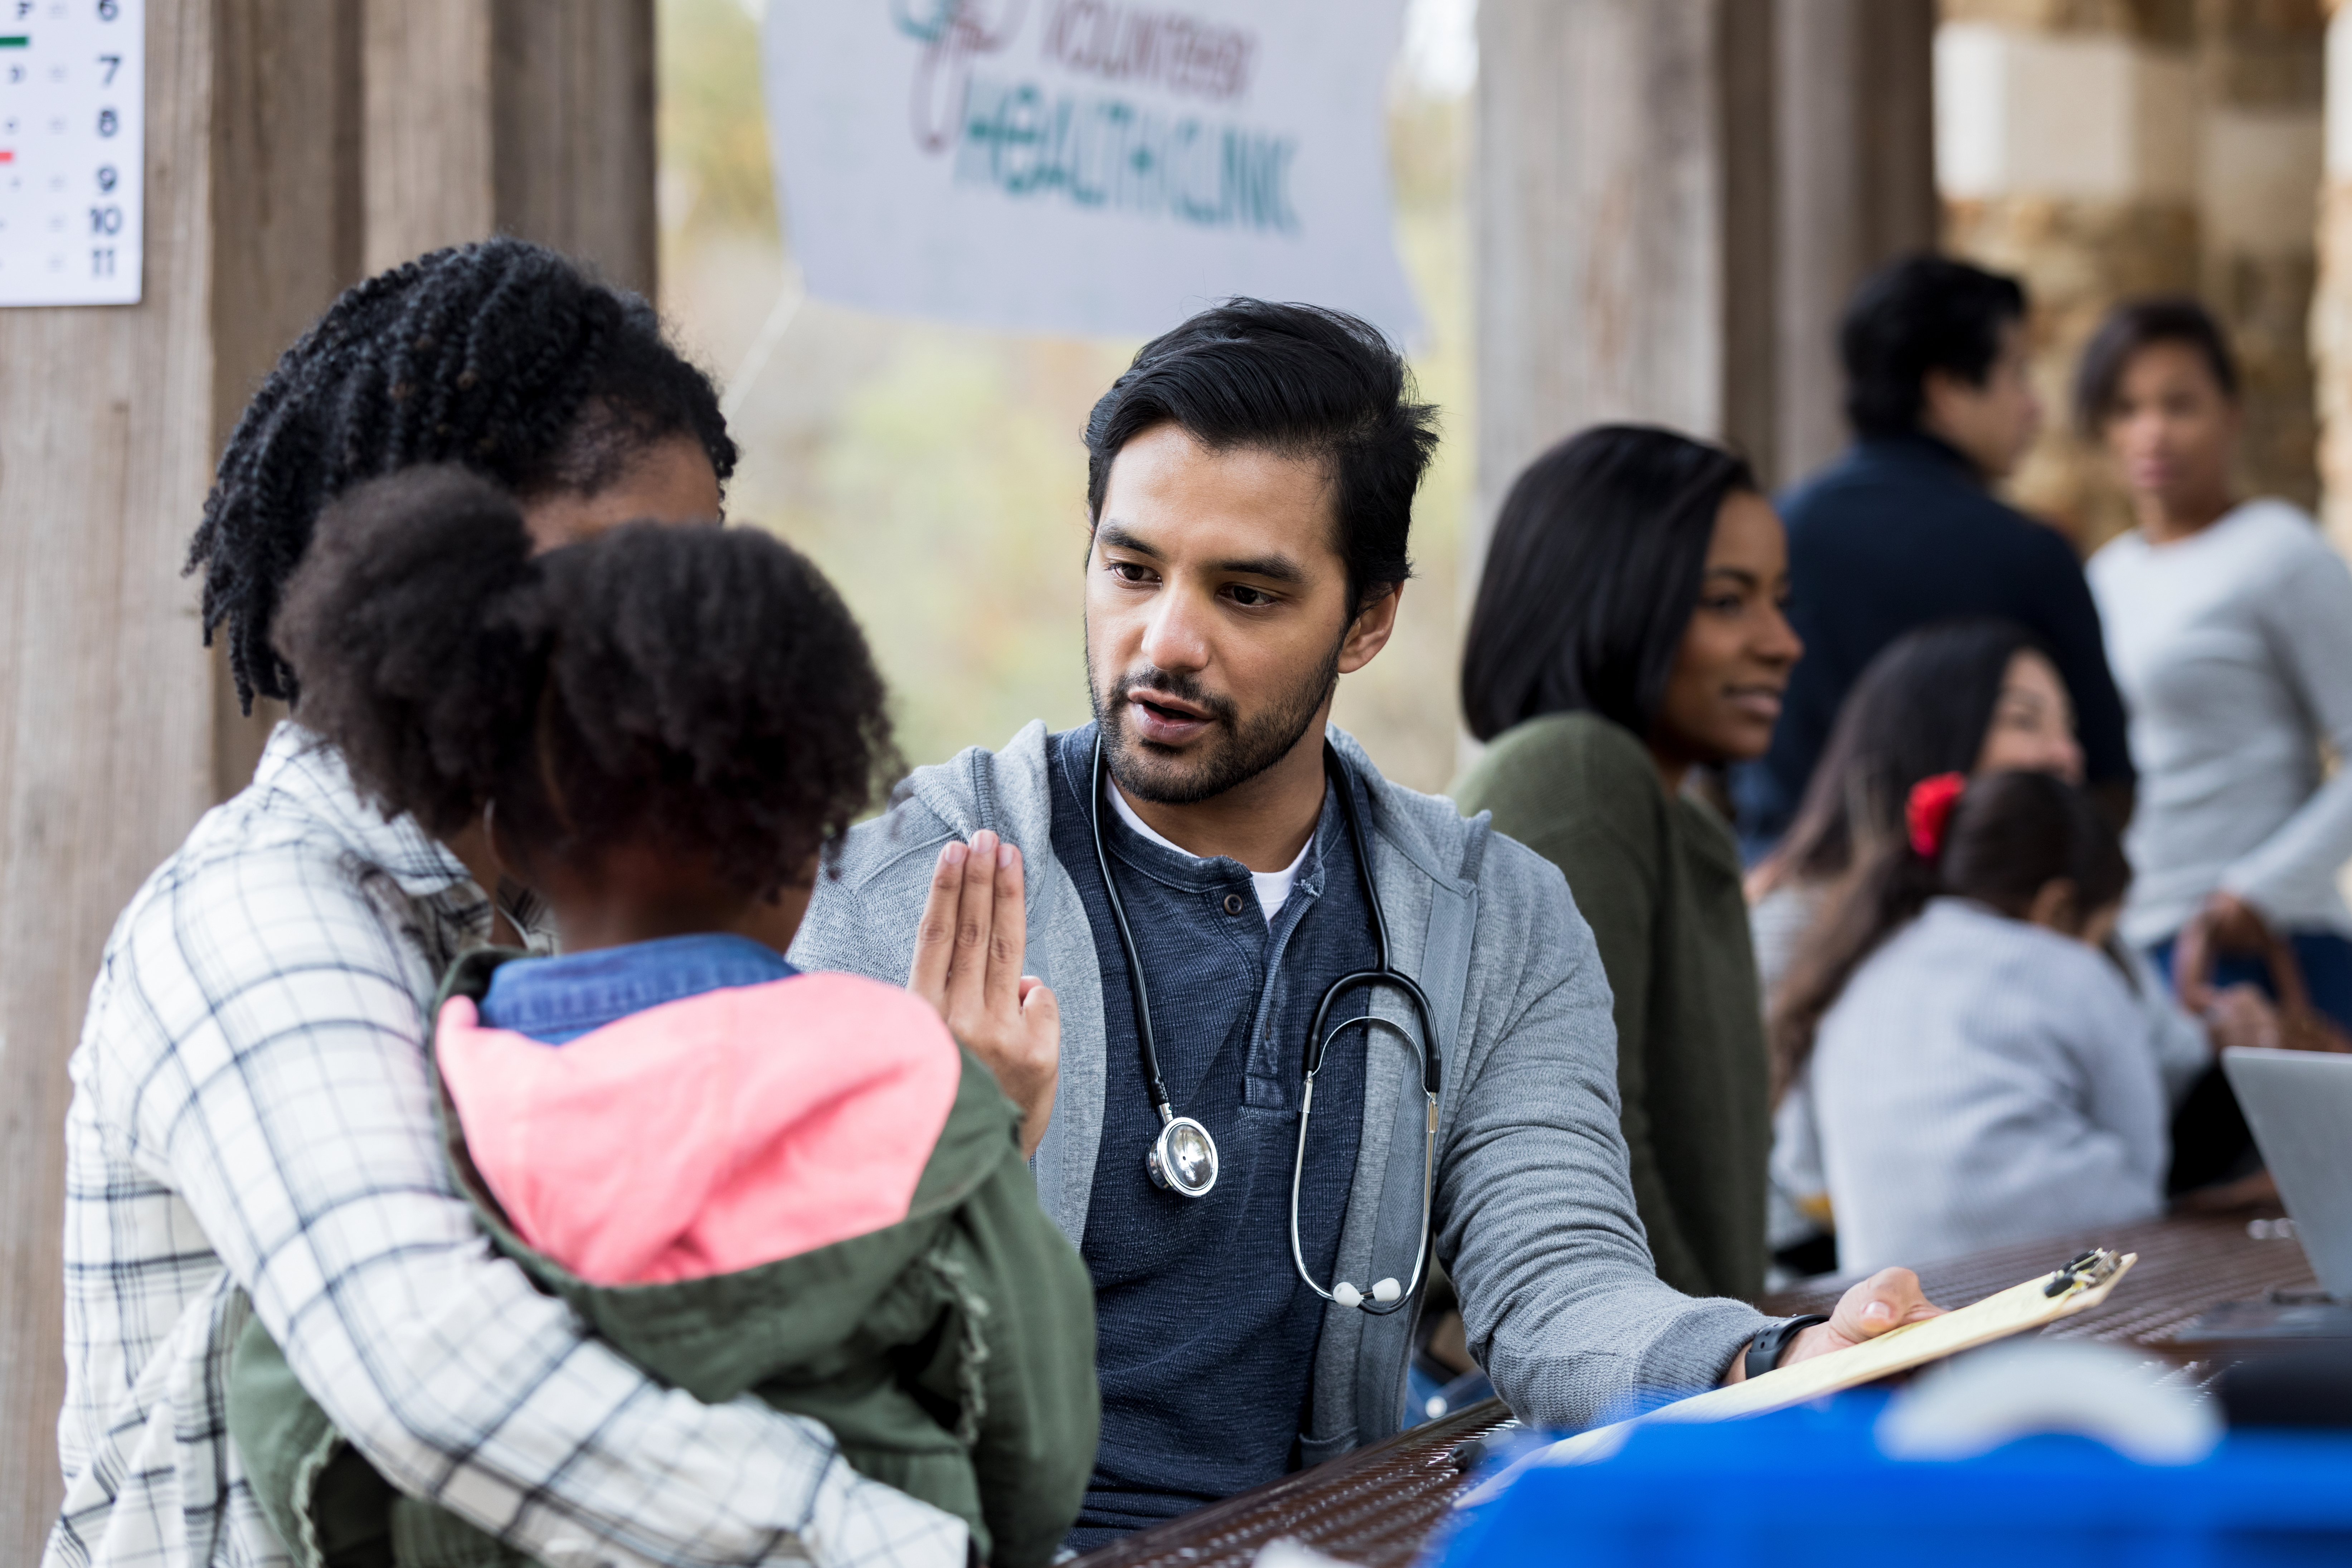 A nurse with a stethoscope engages with a child and her mother at a community health event, offering care and advice in an outdoor setting with other participants around.